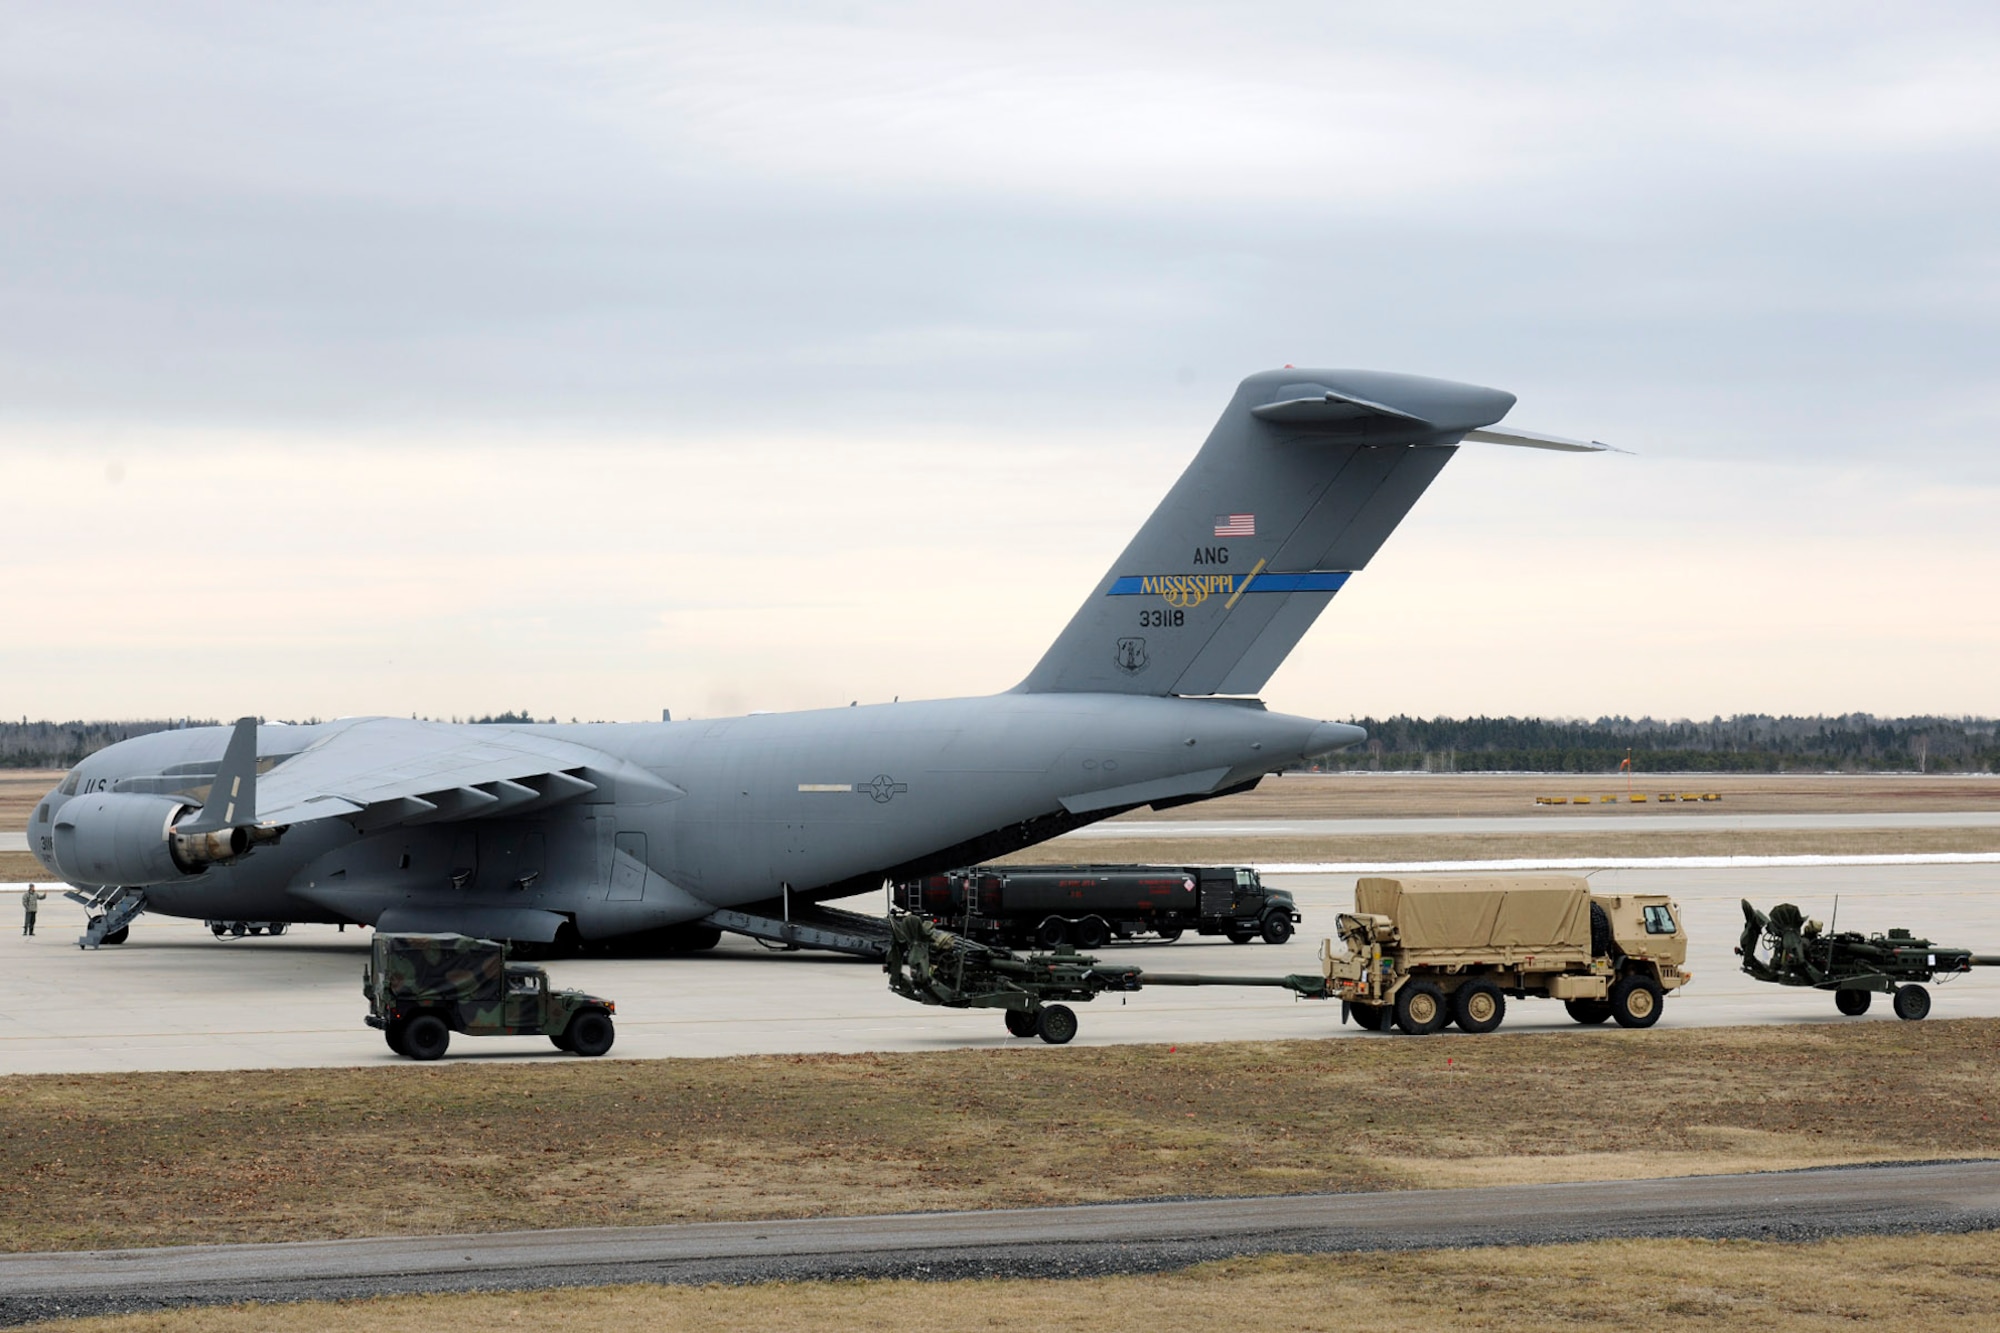 150319-Z-EZ686-244 – Soldiers, trucks, artillery pieces and other equipment from the 119th Field Artillery, Michigan Army National Guard, await loading into a C-17 Globemaster III operated by the Mississippi Air National Guard at the Alpena Combat Readiness Training Center, Mich., March 19, 2015. The equipment was loaded by Airmen from the 127th Logistics Readiness Squadron of the Michigan Air National Guard, which provides aerial port services to military units across the state of Michigan. (U.S. Air National Guard photo by Master Sgt. David Kujawa) 